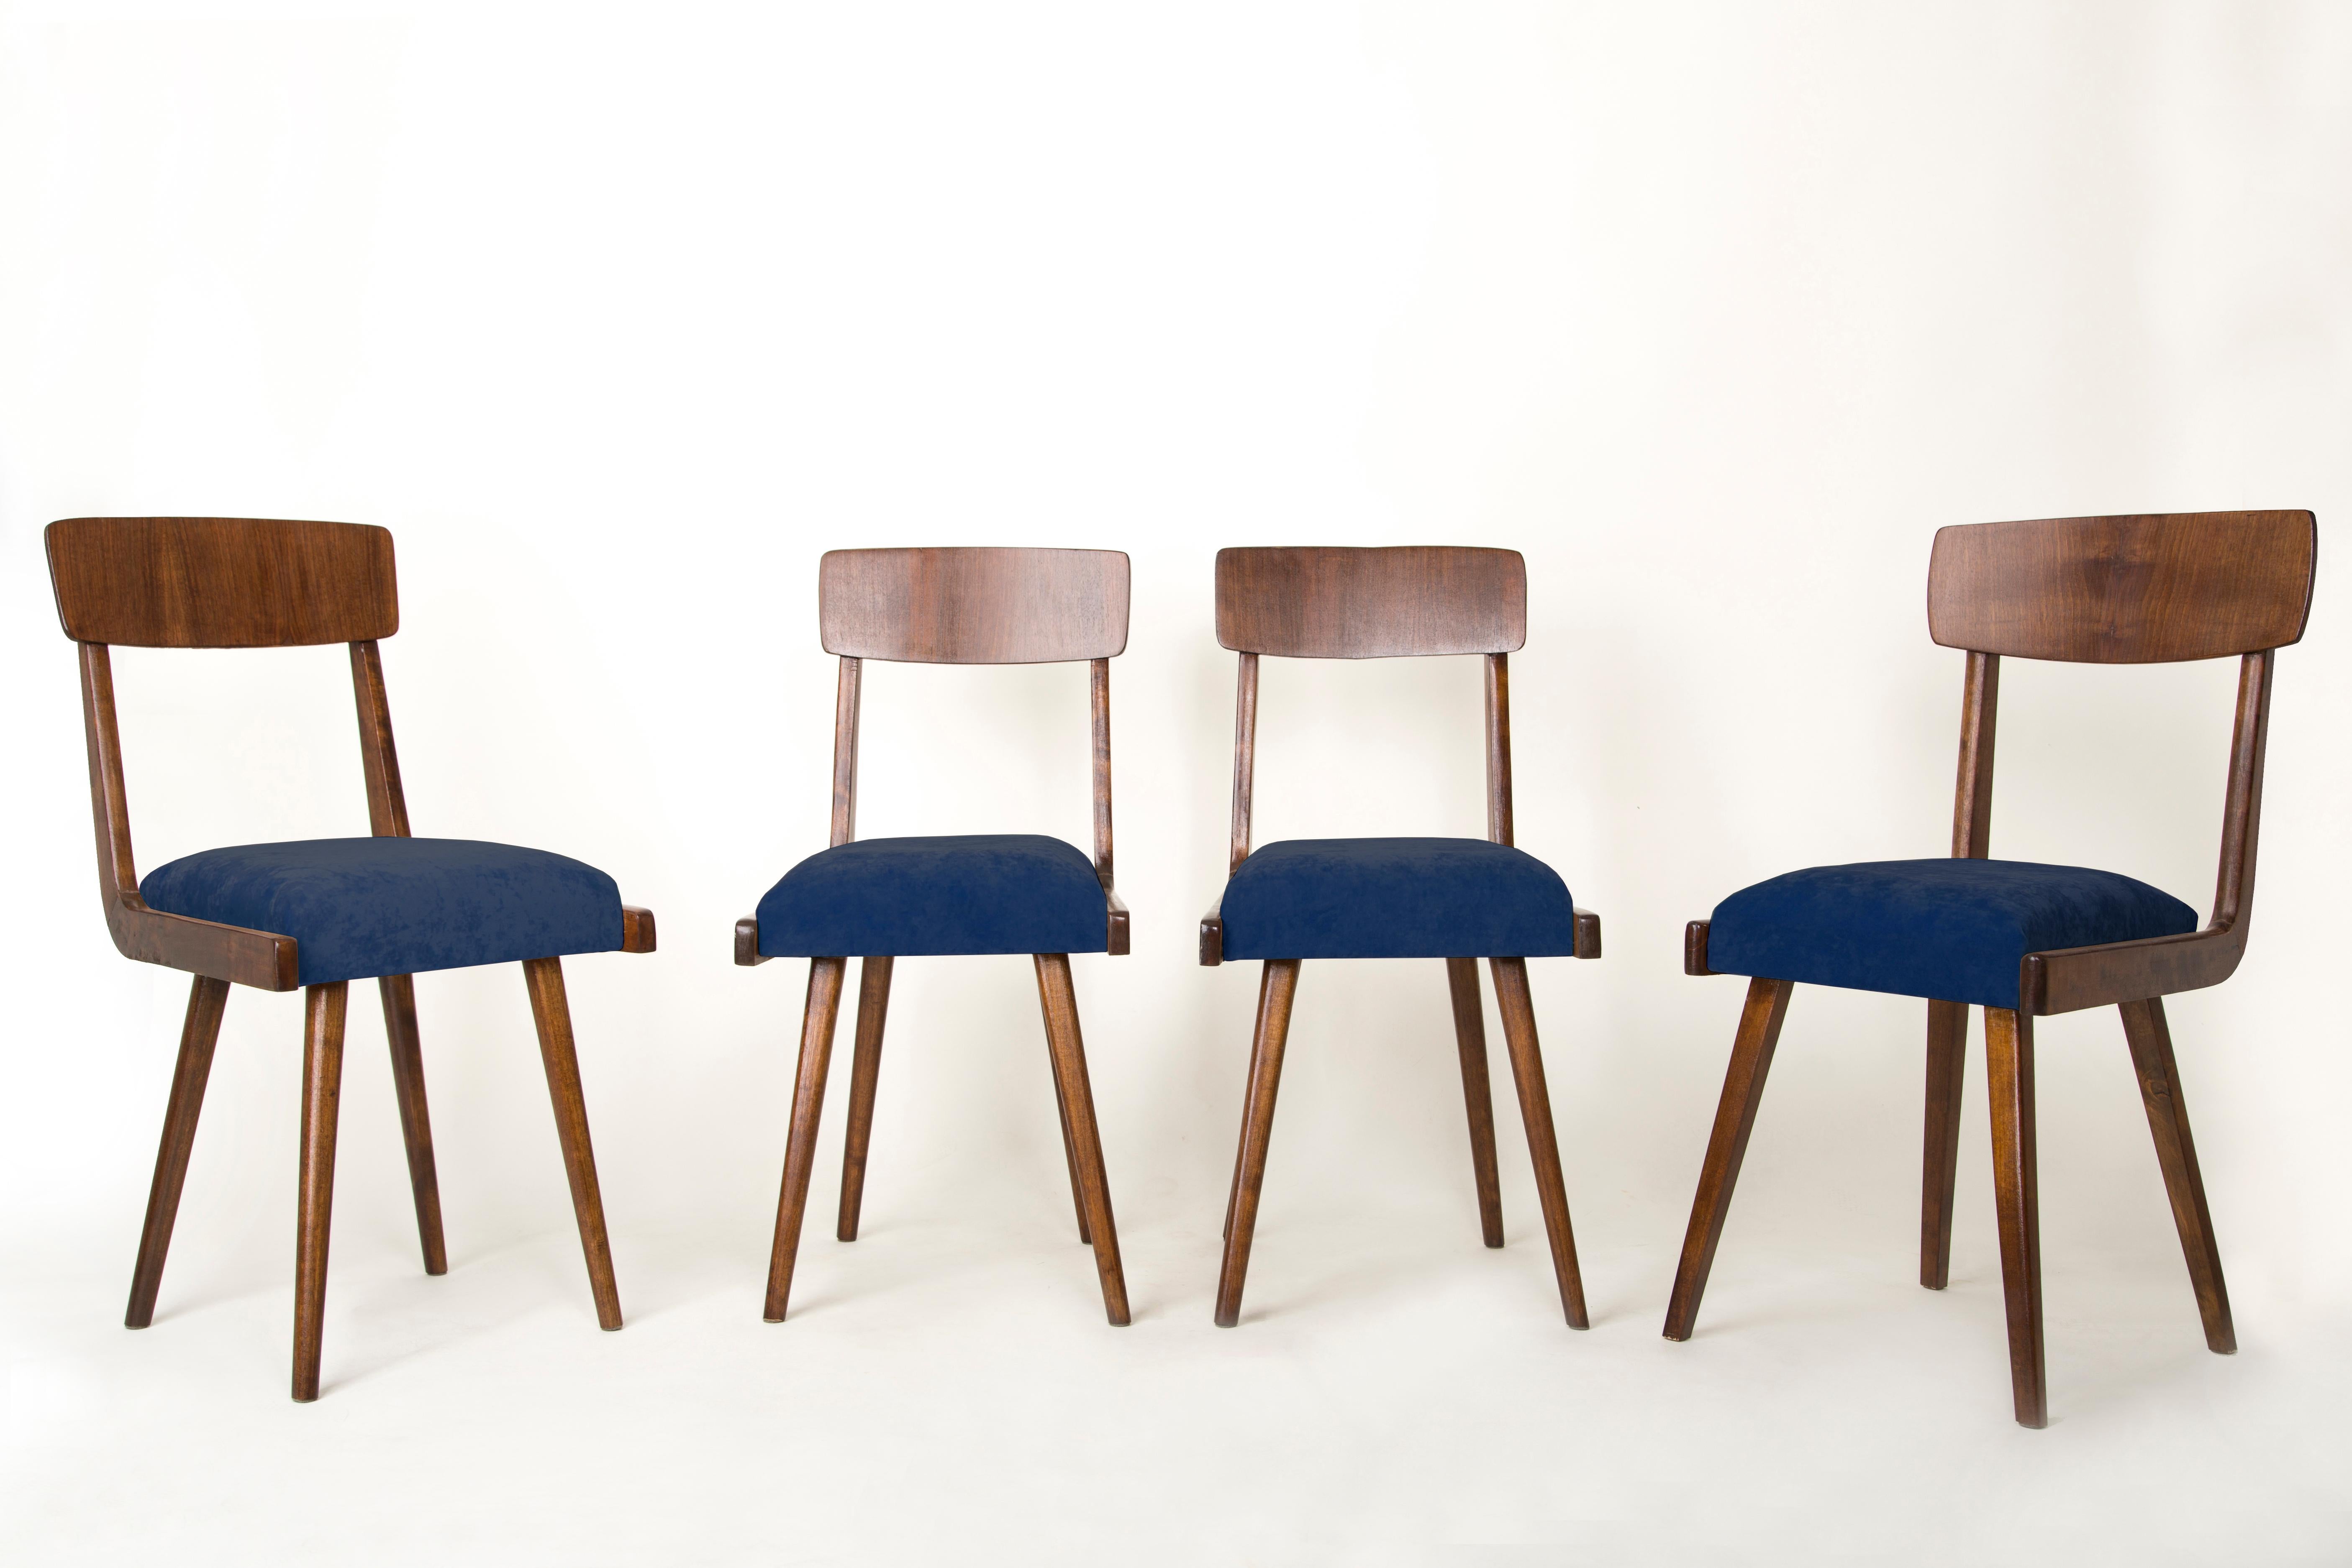 Chairs designed by prof. Rajmund Halas. They have been made of beechwood. They have undergone a complete upholstery renovation, the woodwork has been refreshed. Seats were dressed in navy blue soft velvet. They are stabile and very shapely. Chairs